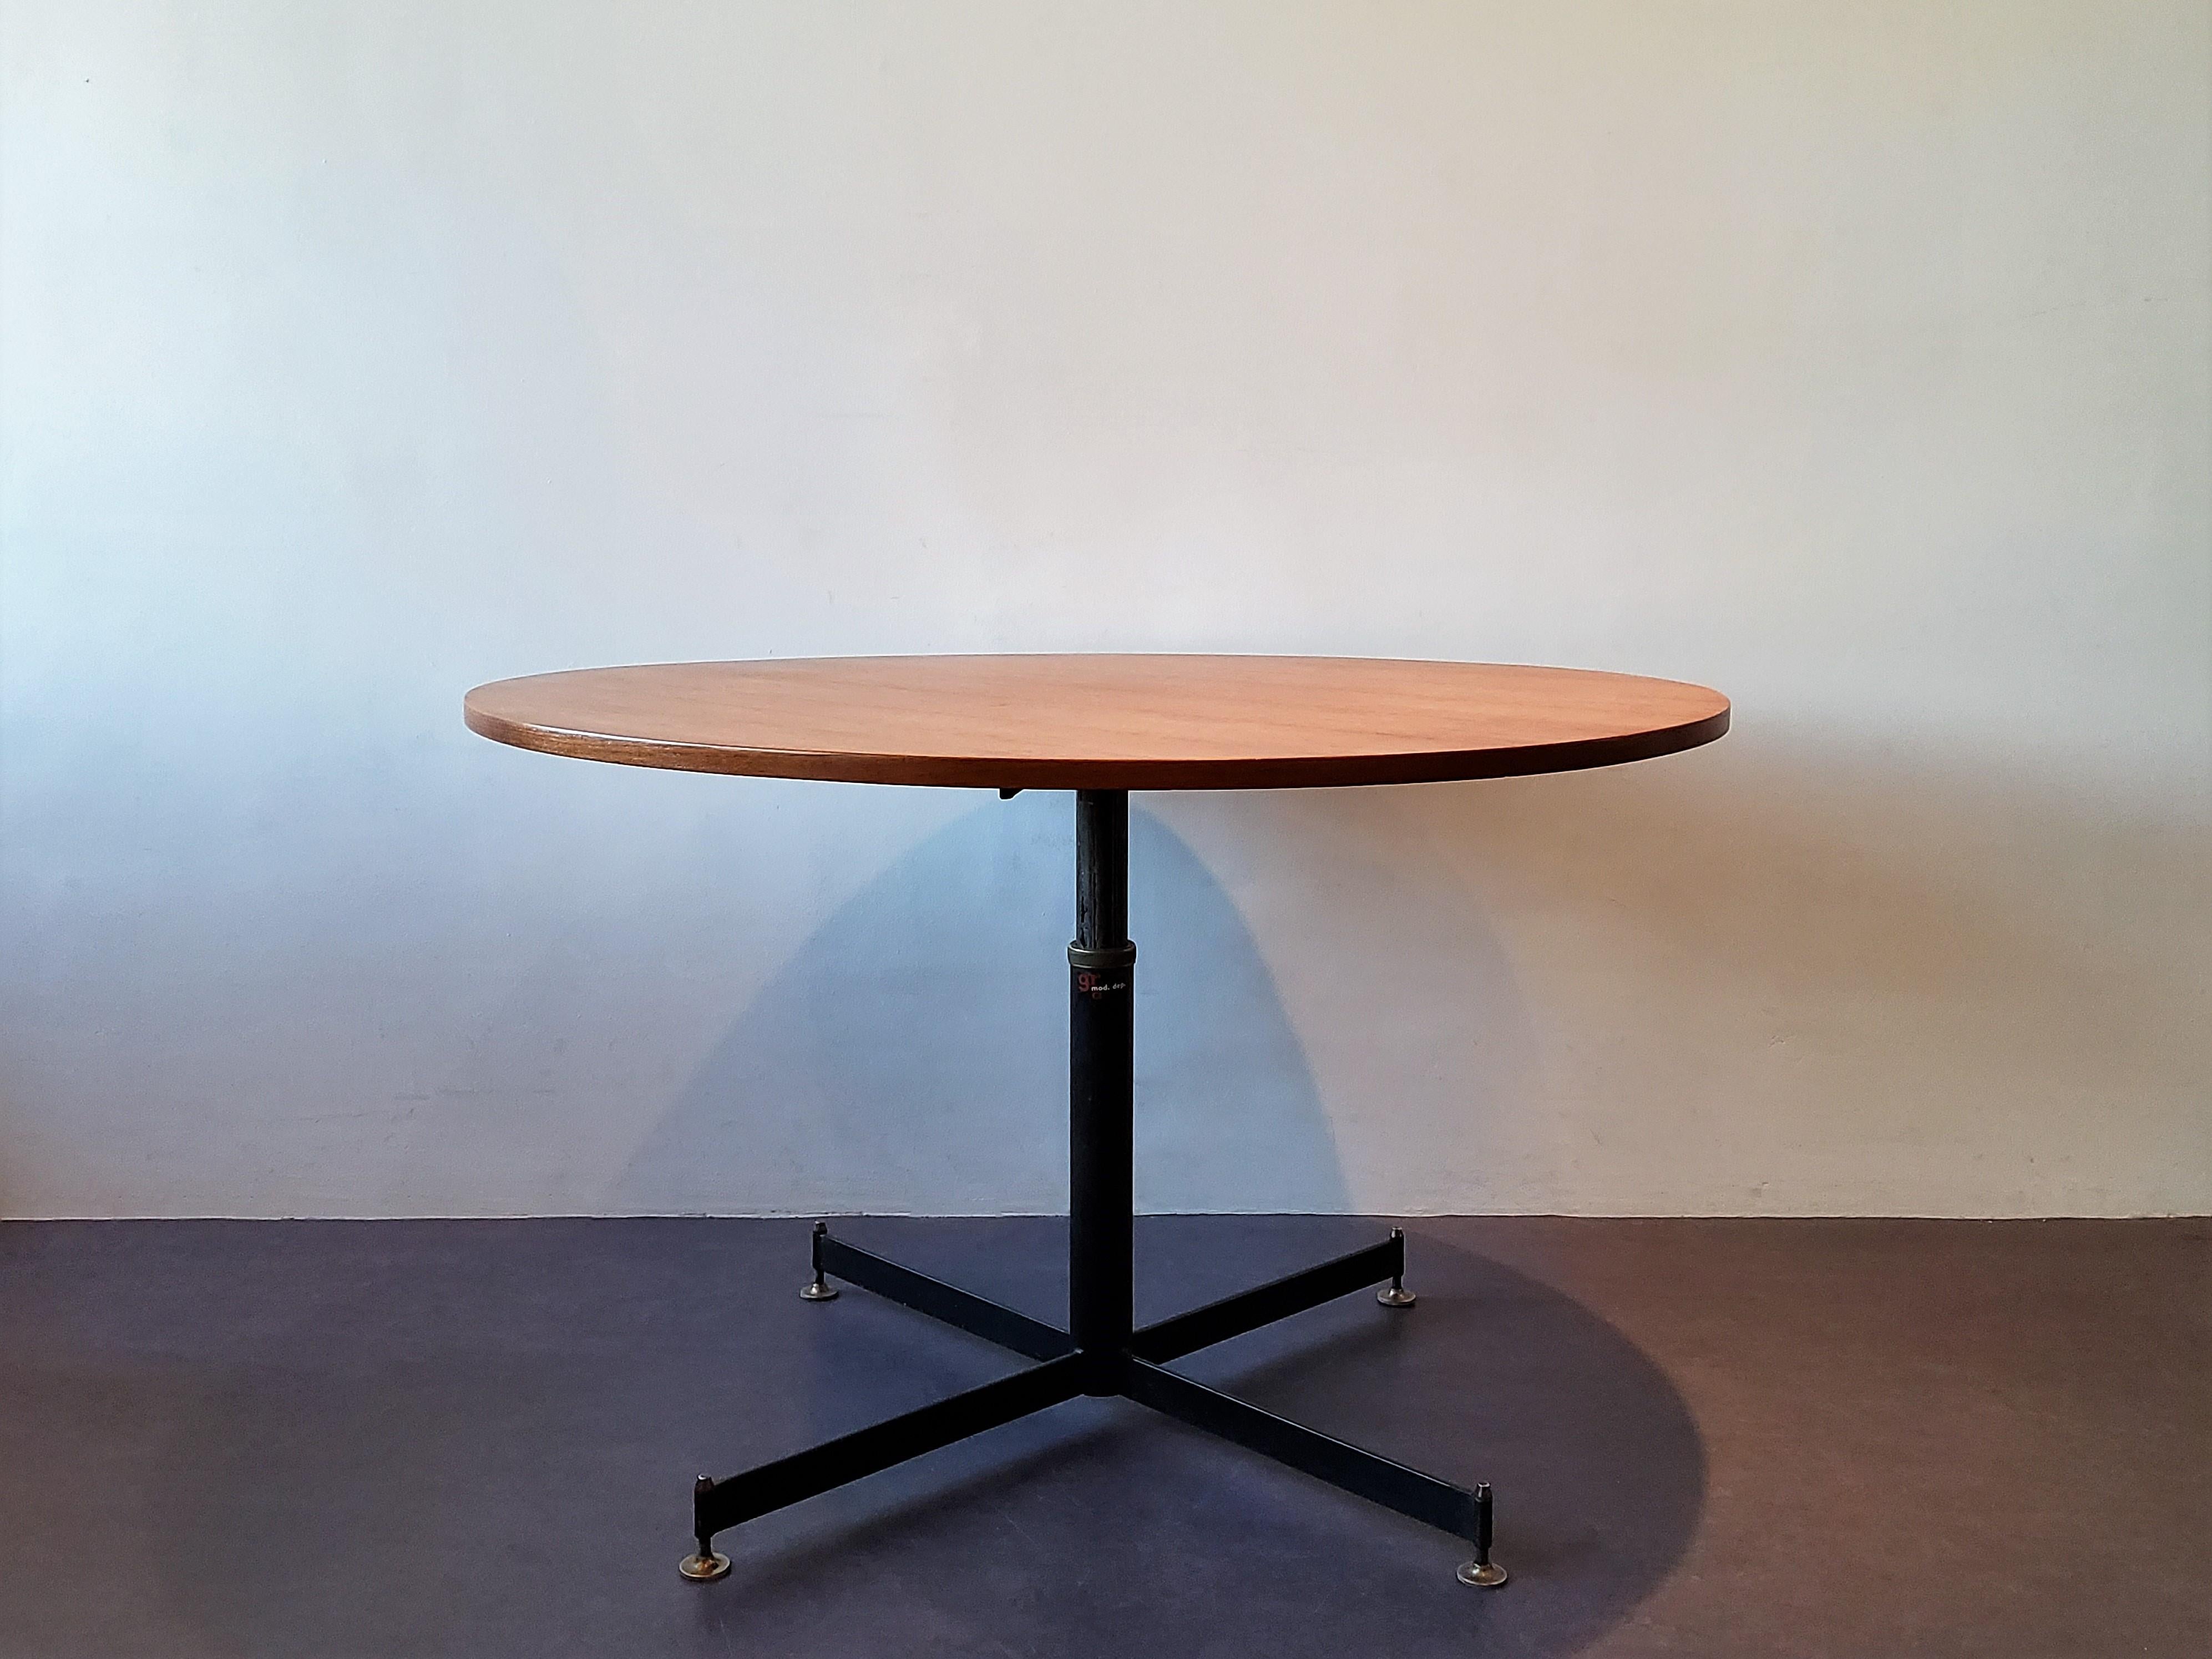 This stunning table is of Italian design and looks very much like the designs of Ignazio Gardella. It has a teak veneer wooden round top and adjustable base (by turning the knob) that extends in height for use as either a coffee or a dining table.